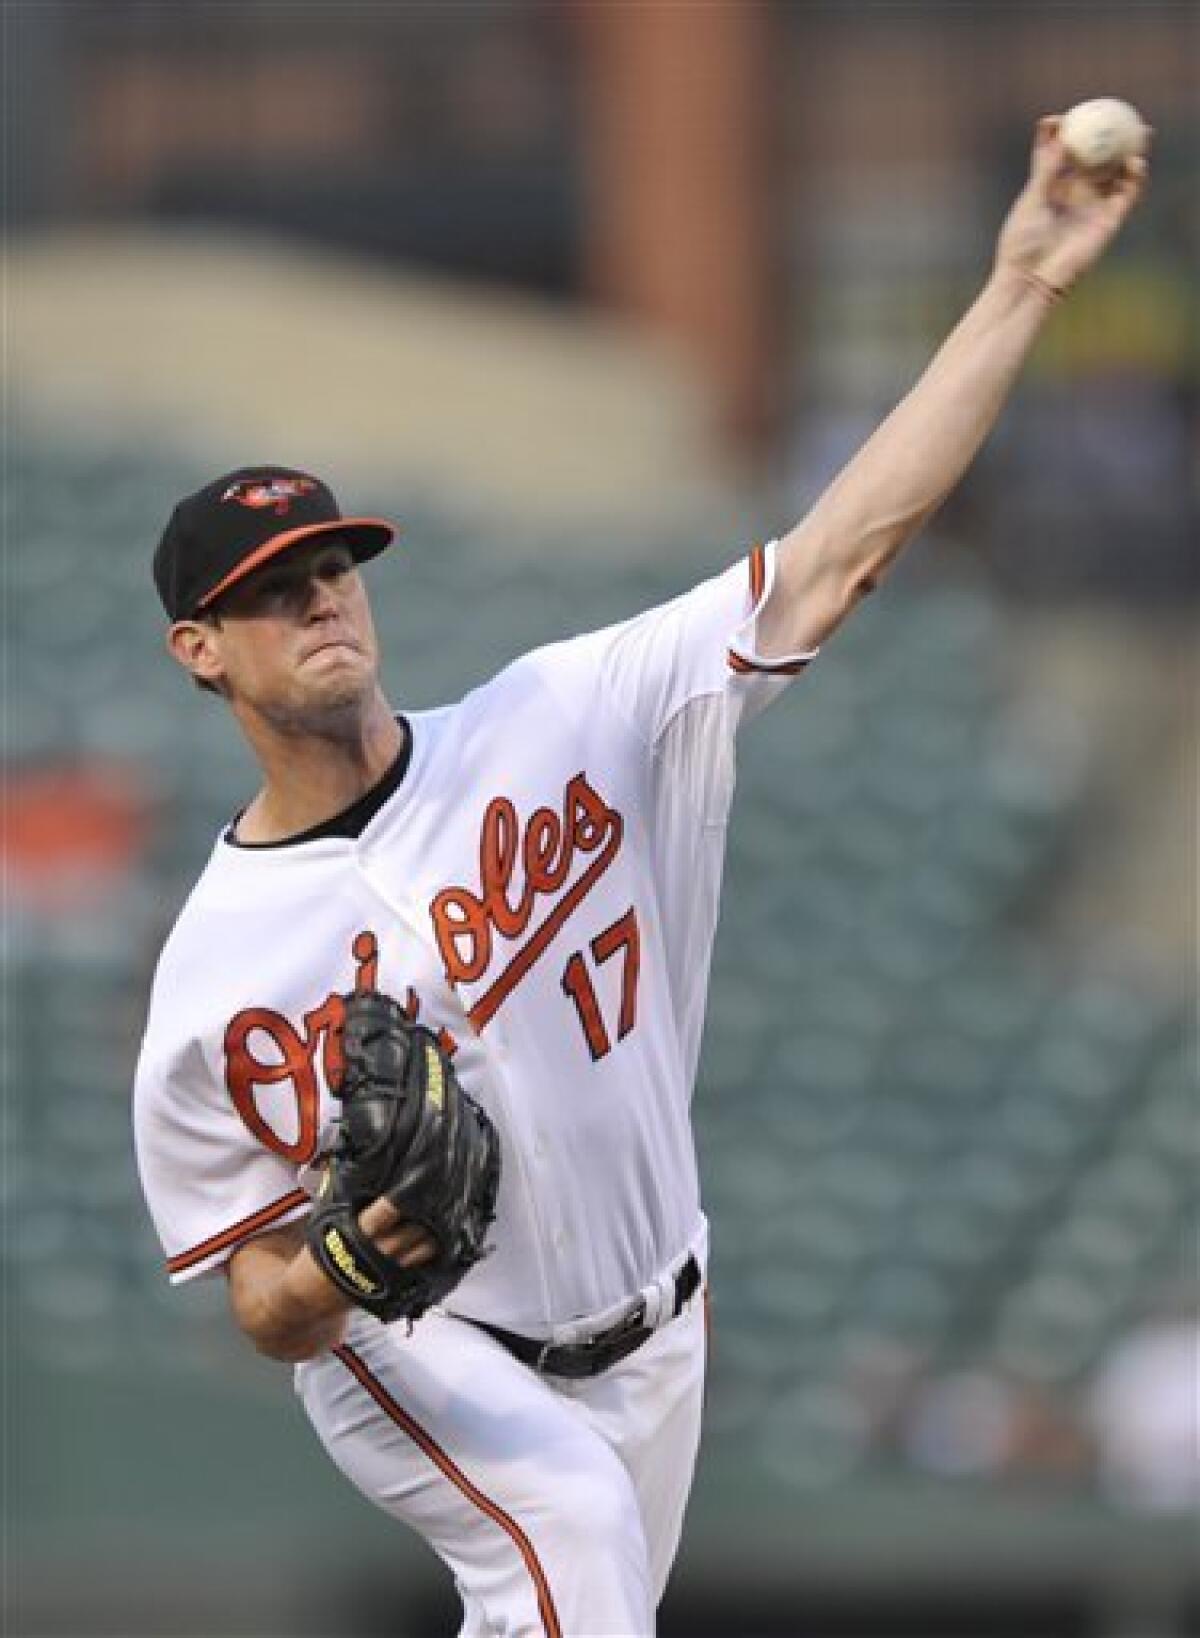 Roberts homer lifts Orioles over White Sox 3-2